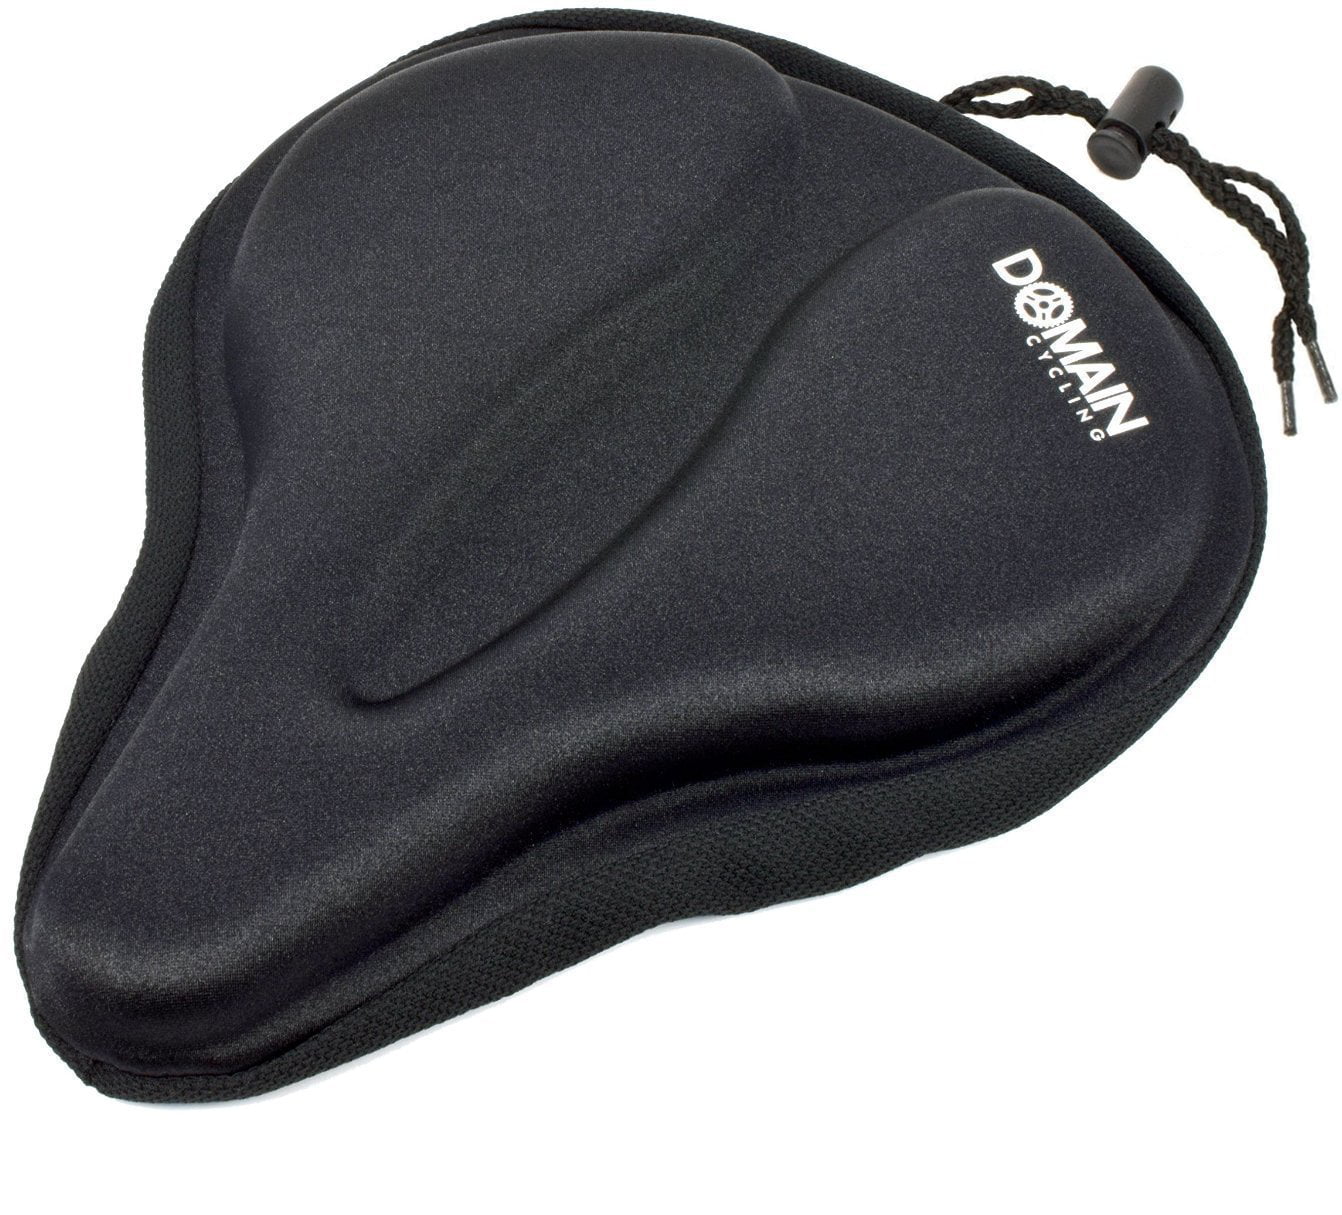 Large Bicycle Gel Seat Cover, Wide 